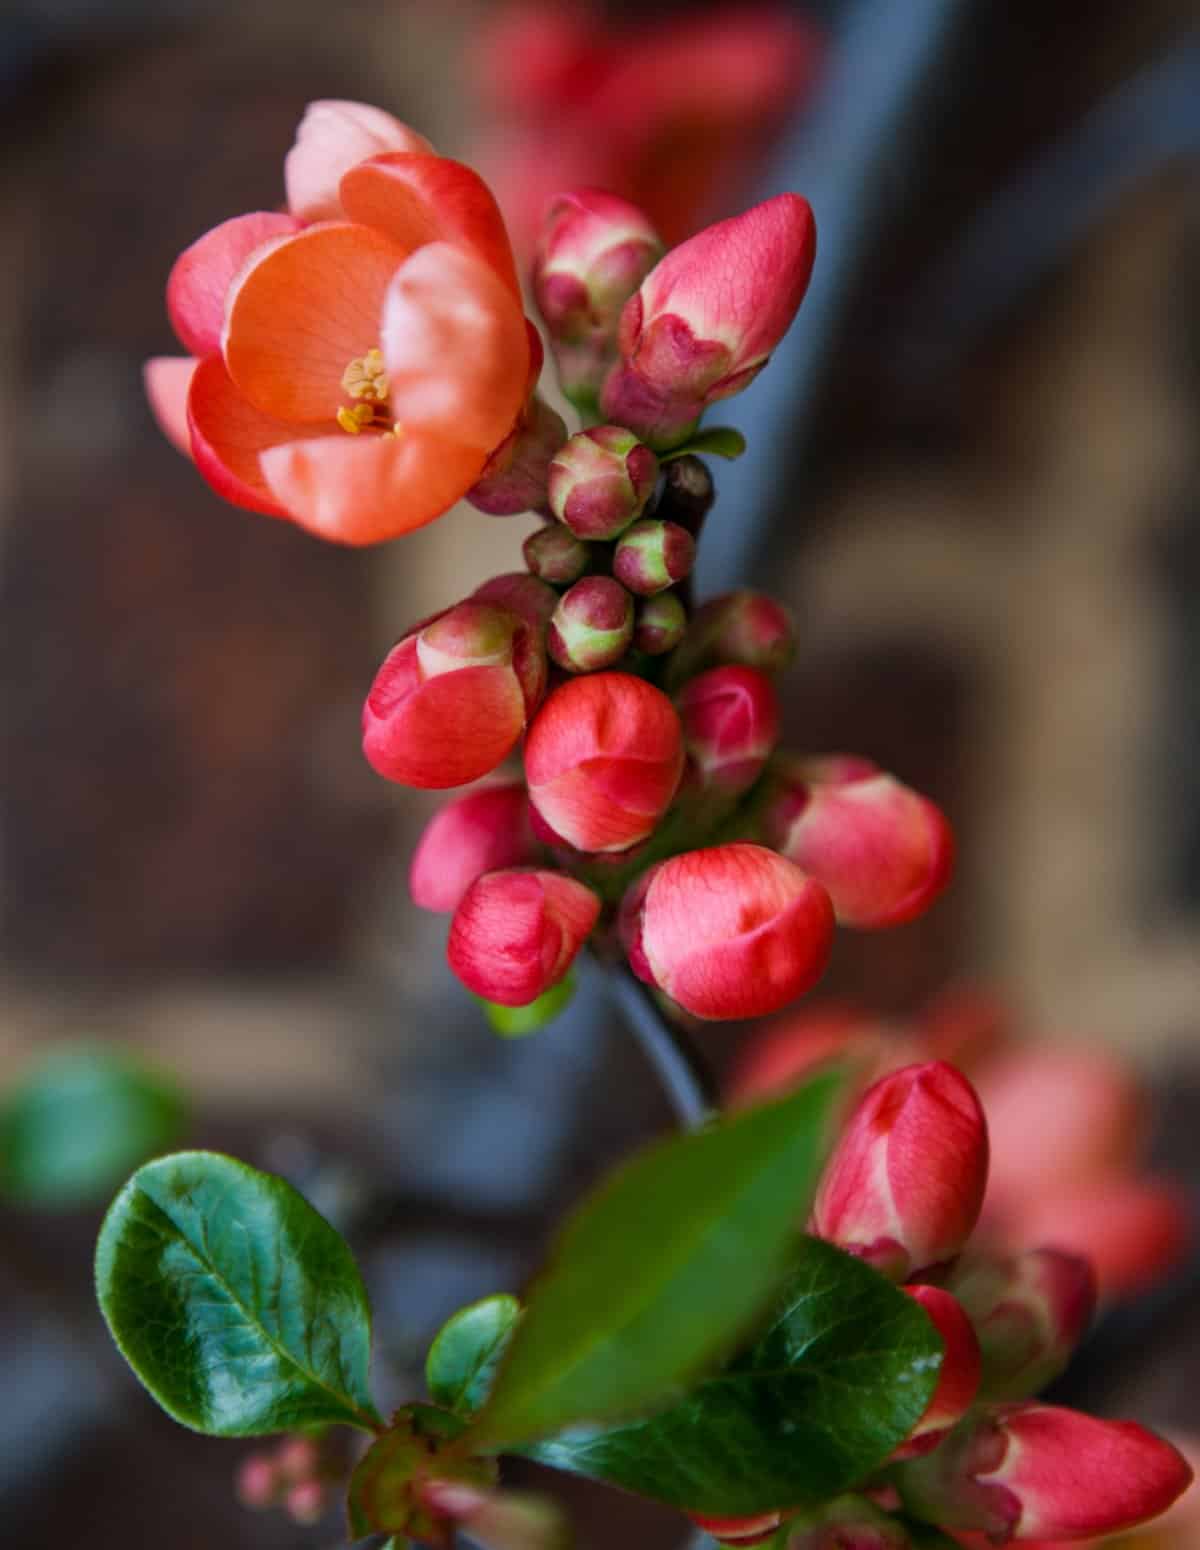 Blooming flowers of a maule's quince tree